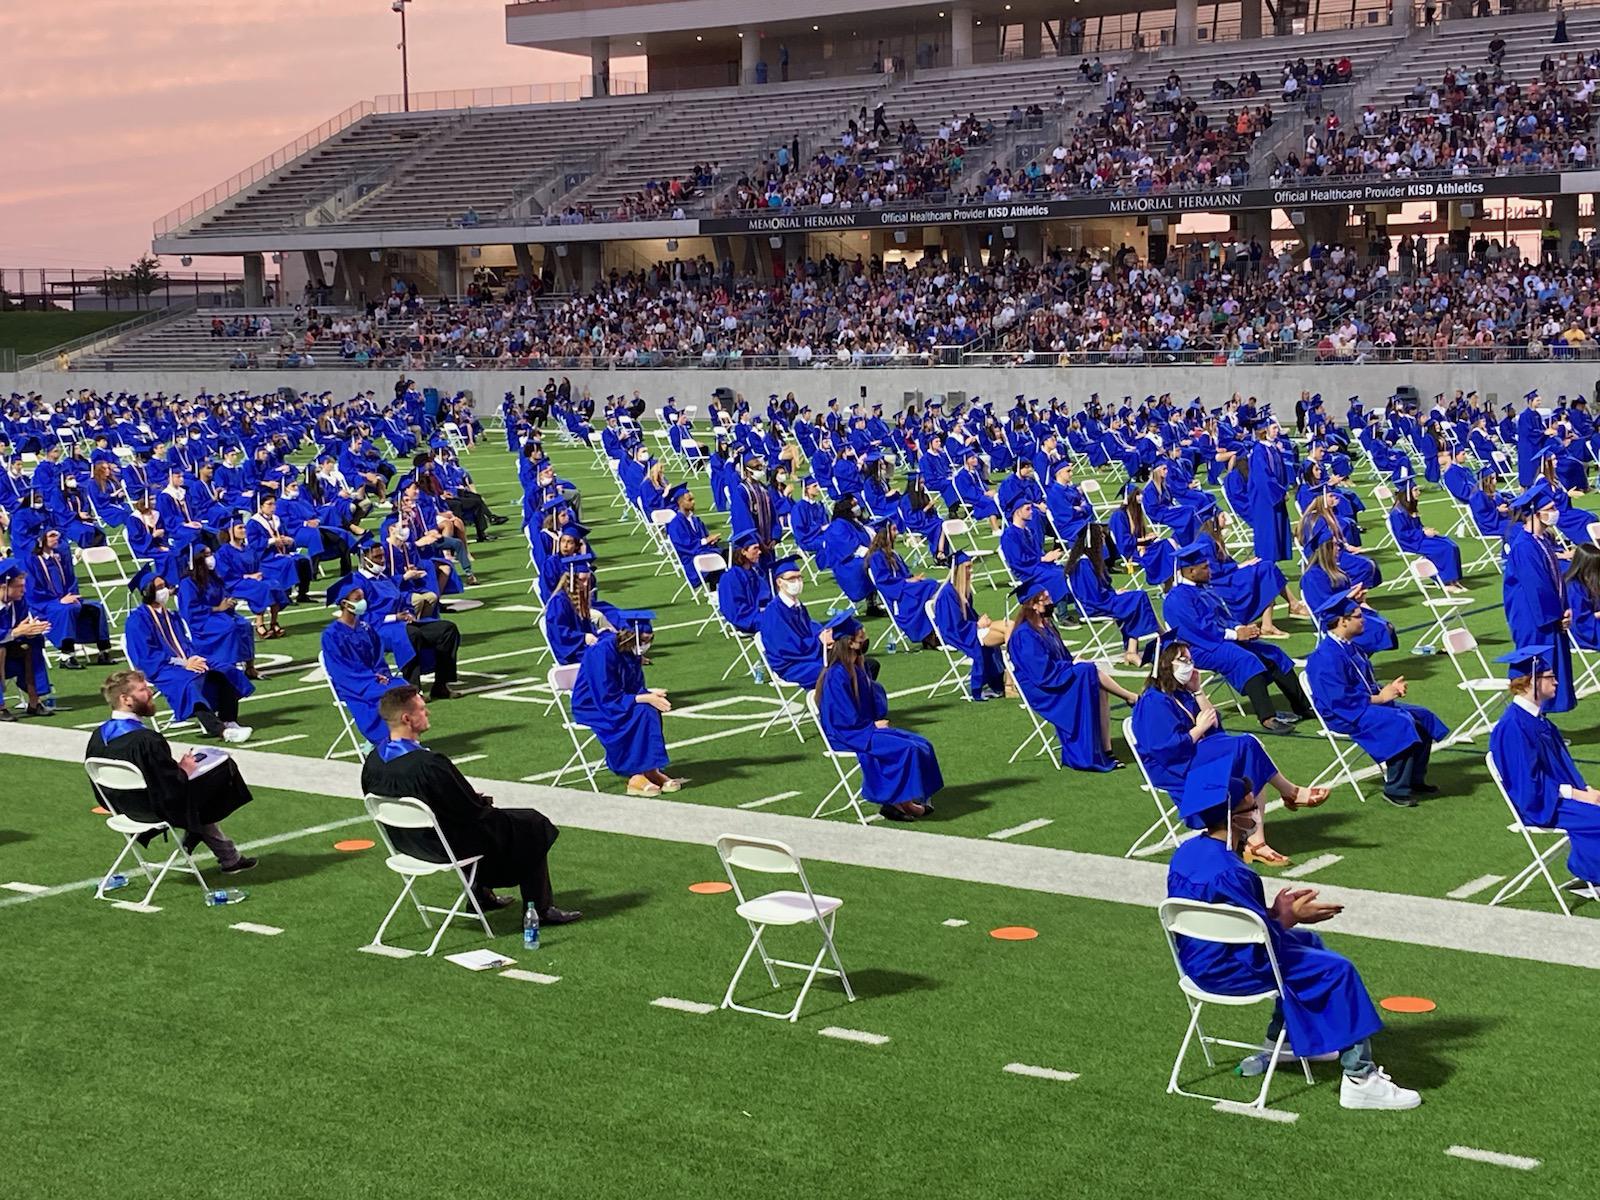 Here’s everything to know about Katy ISD graduations